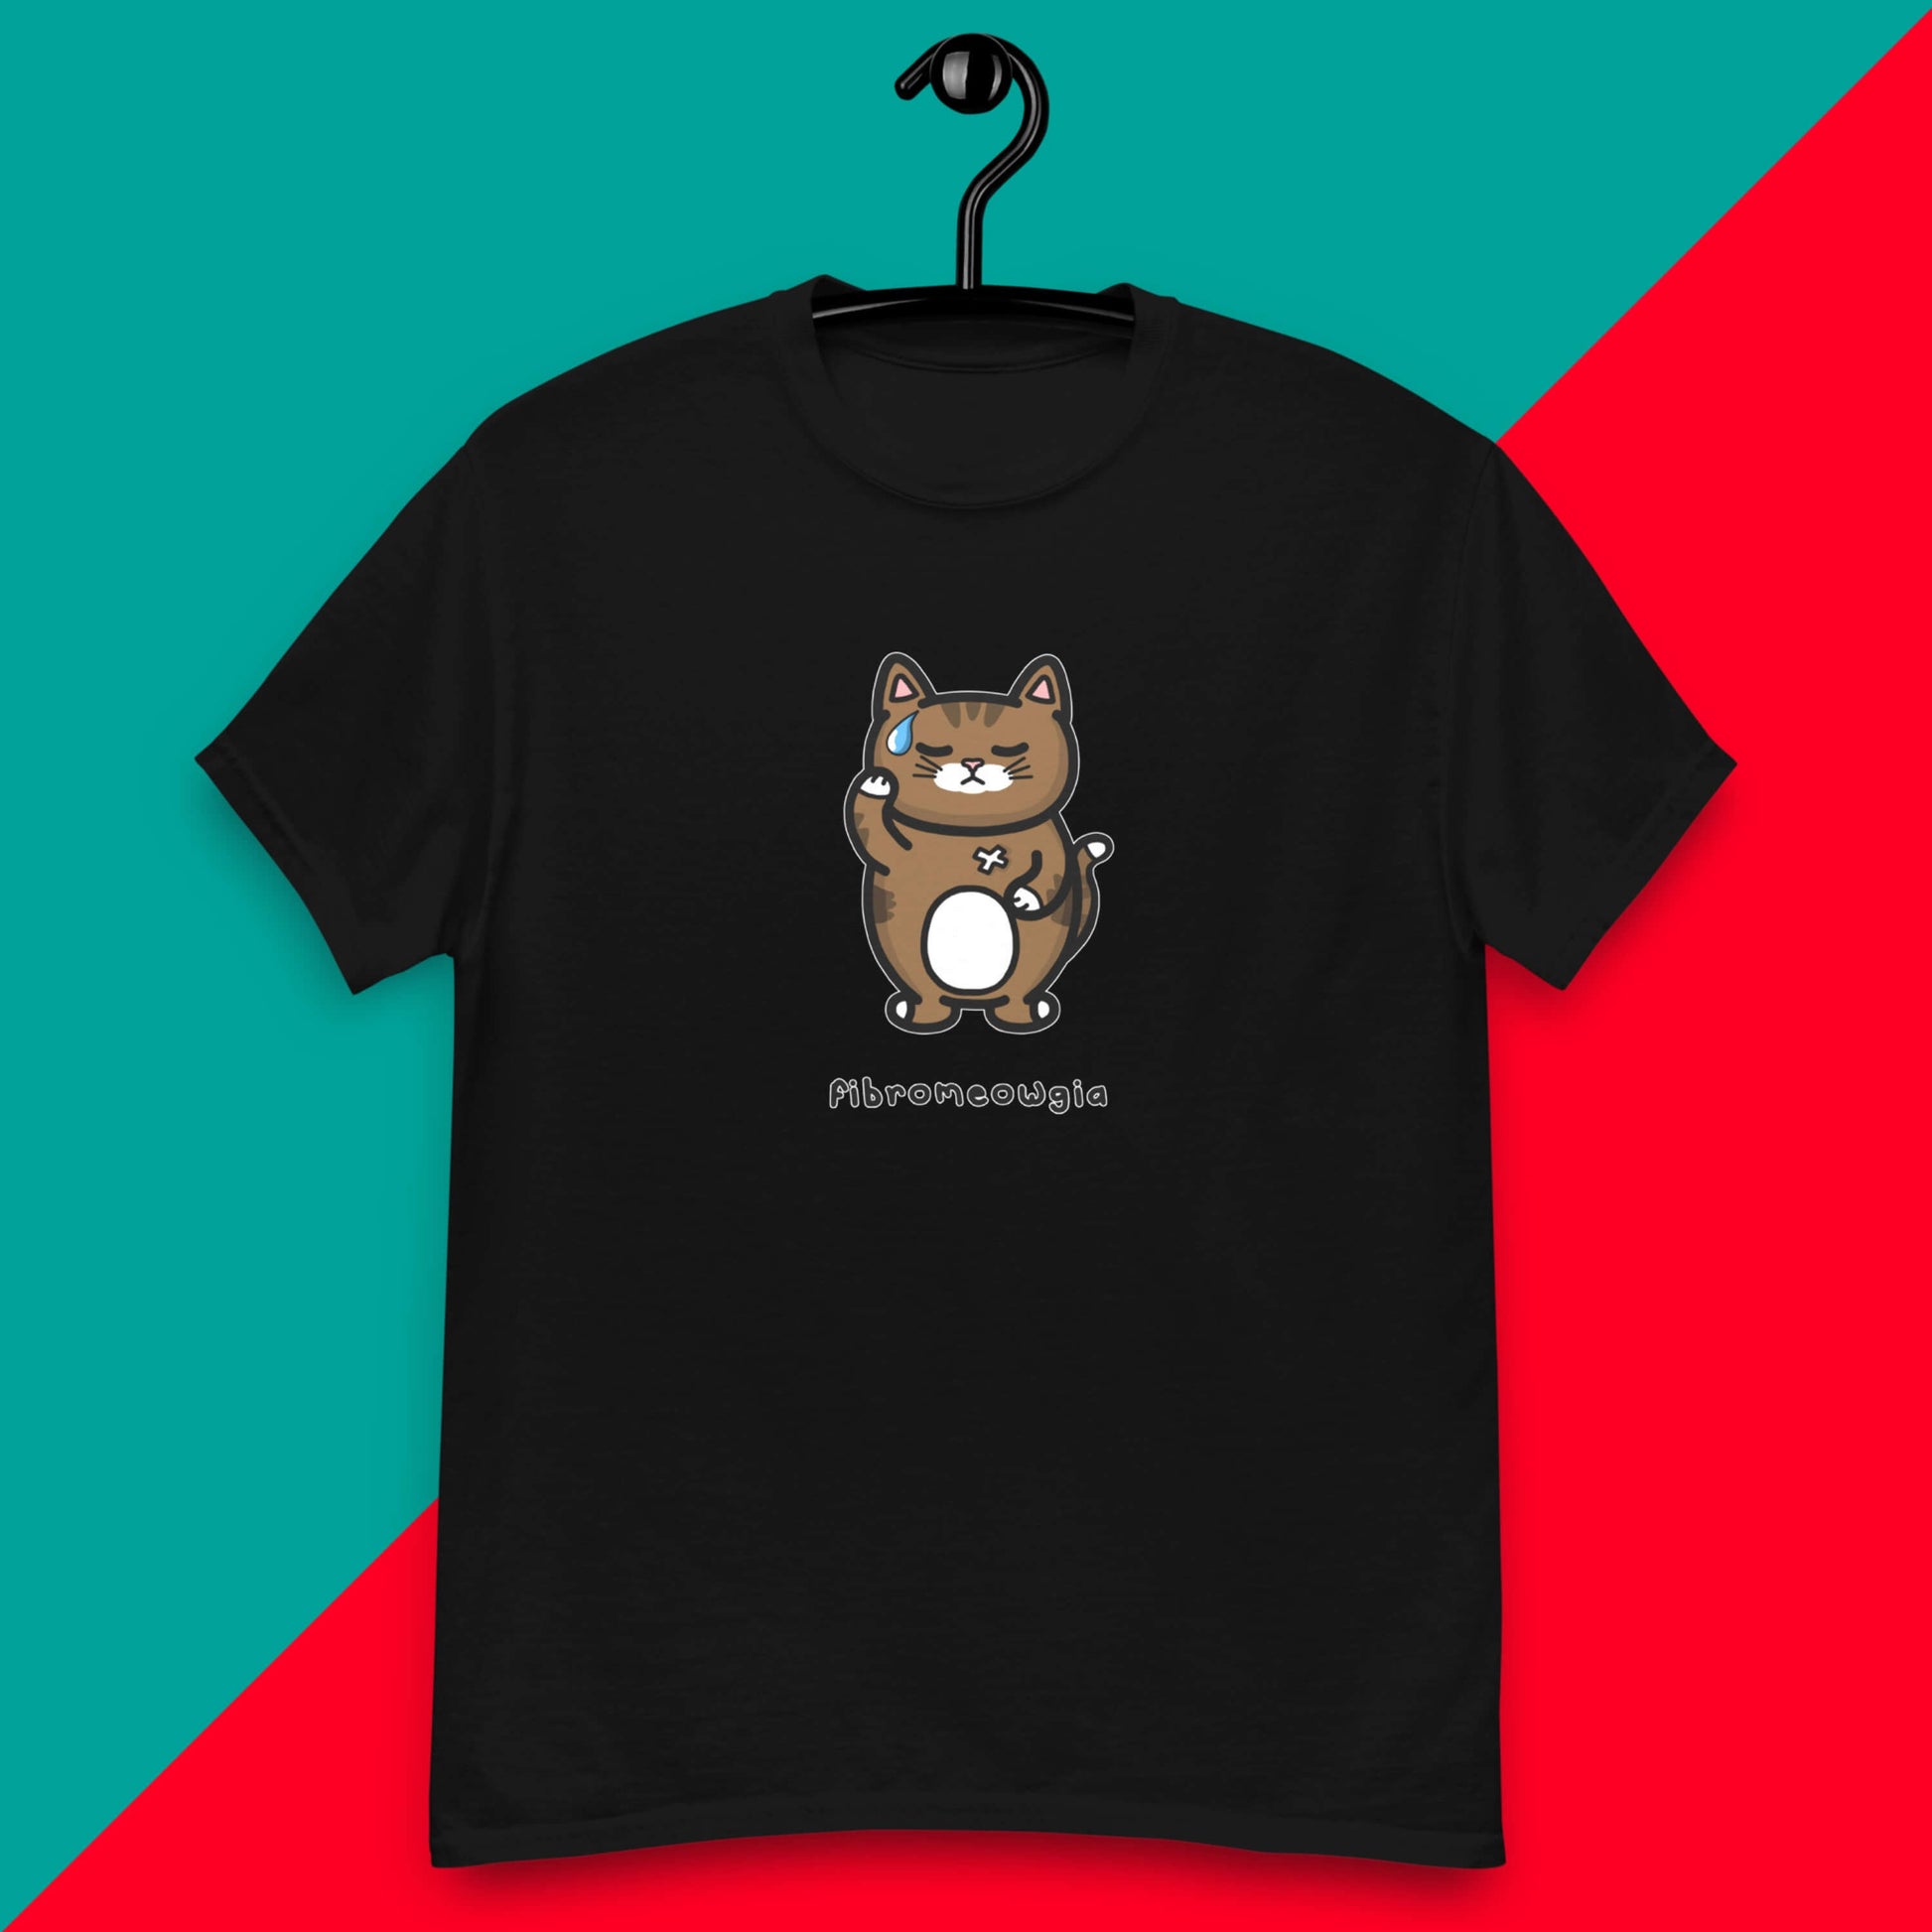 The Fibromeowgia Cat Tee - Fibromyalgia Syndrome hanging on a black hanger over a red and blue background. The black short sleeve tshirt features a sad brown tabby cat with a sweat droplet clutching its body with a white bandaid and bottom text reading 'fibromeowgia'. The hand drawn design is raising awareness for fibro fibromyalgia syndrome.